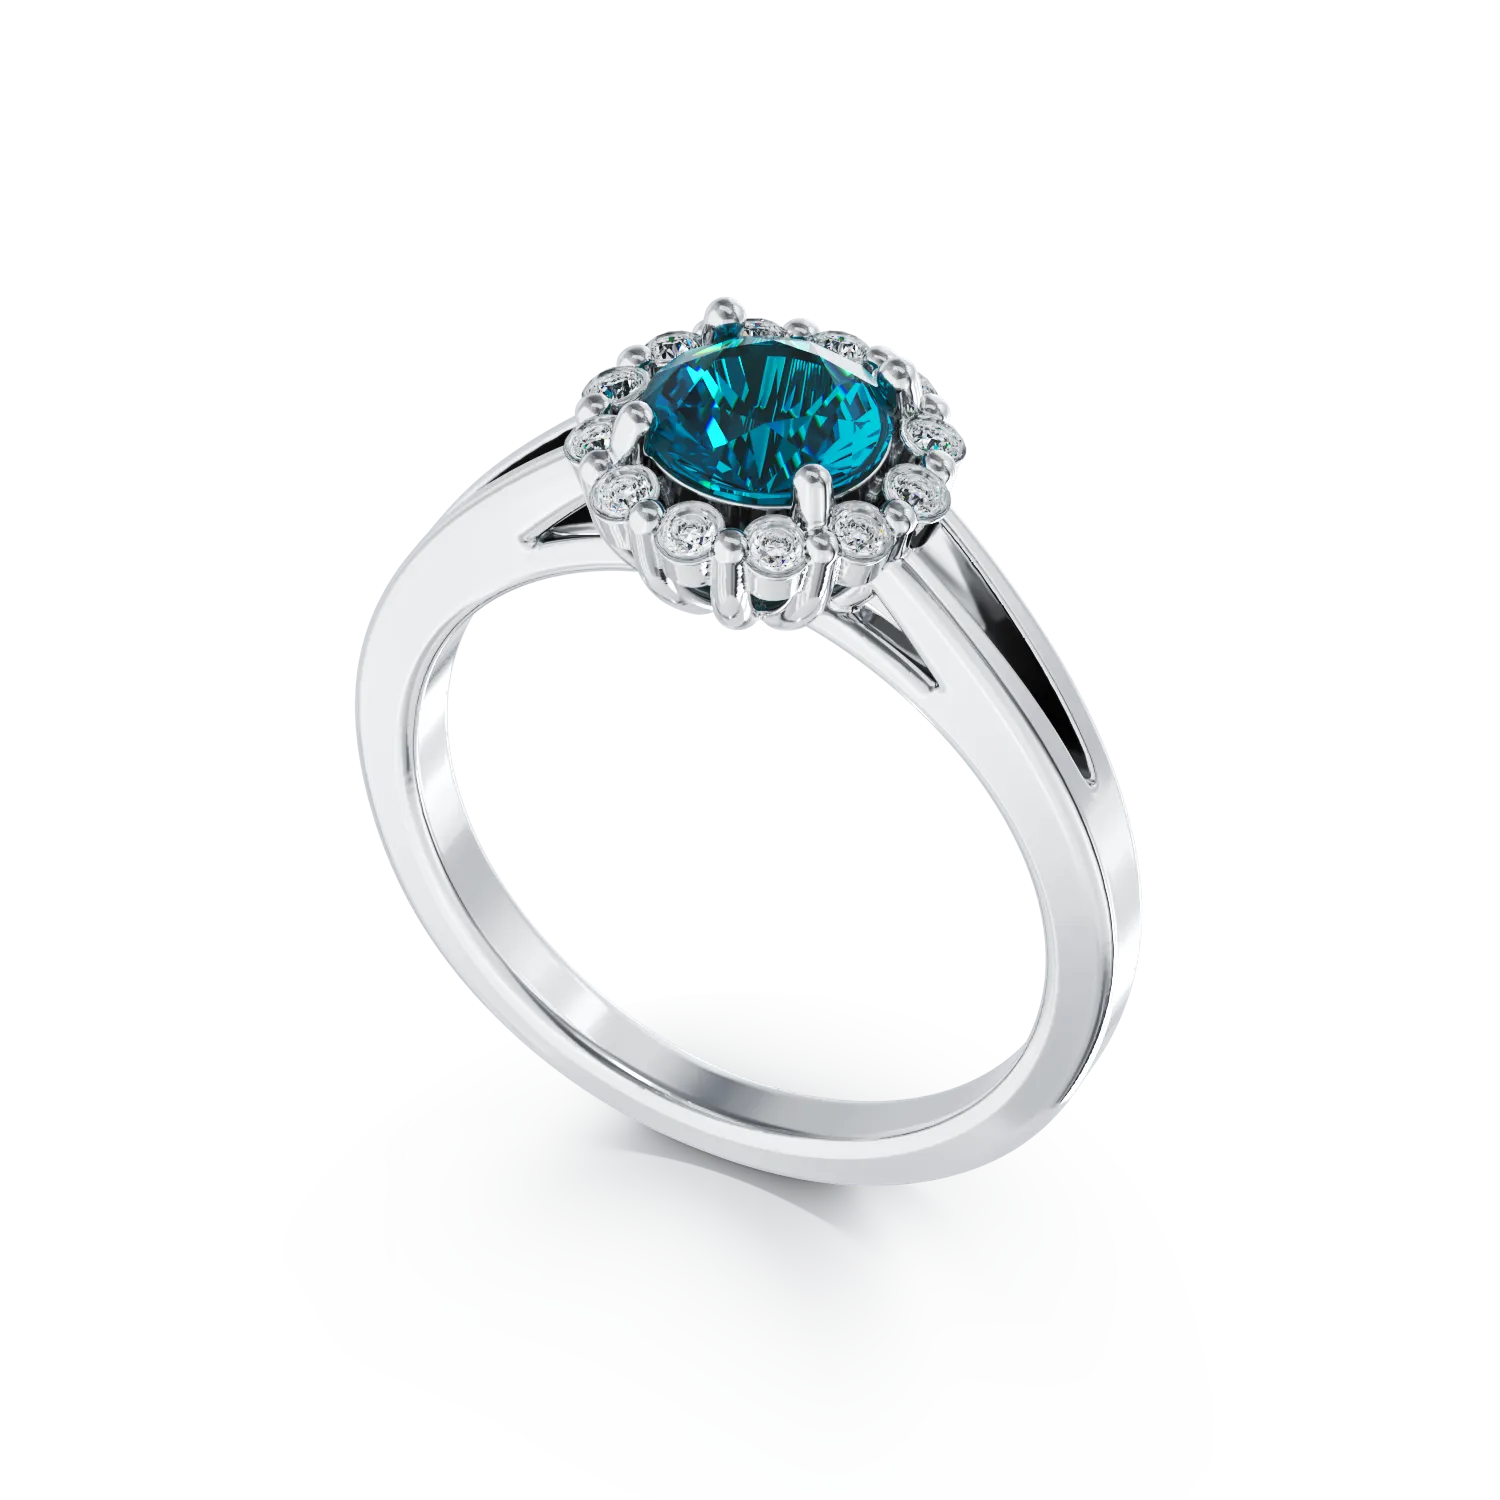 18K white gold engagement ring with blue diamond of 0.55ct and diamonds of 0.18ct